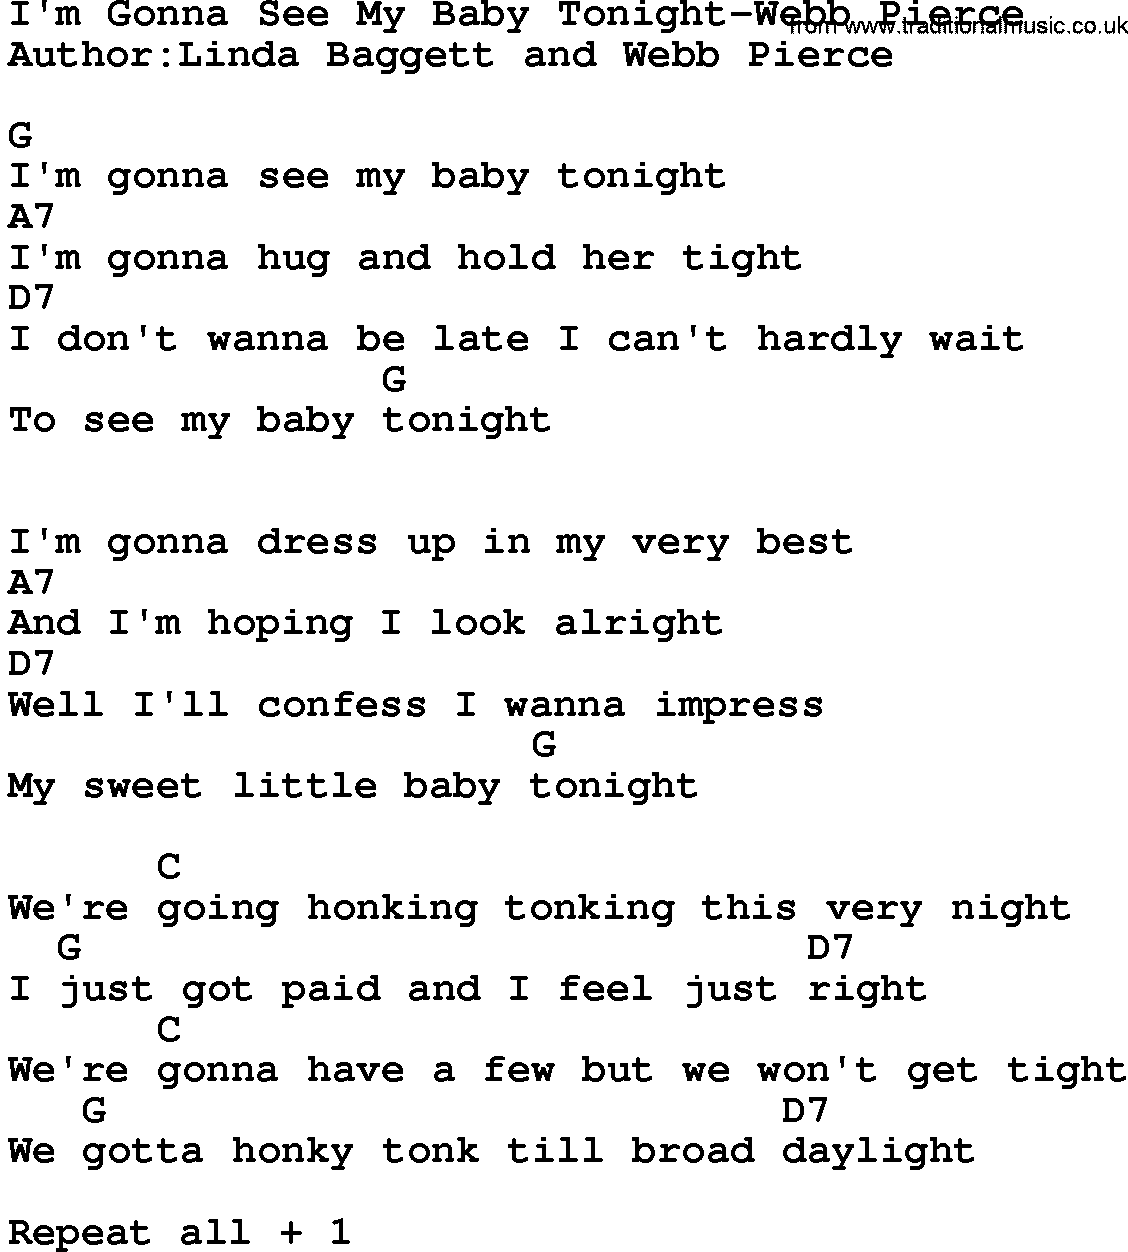 Country music song: I'm Gonna See My Baby Tonight-Webb Pierce lyrics and chords